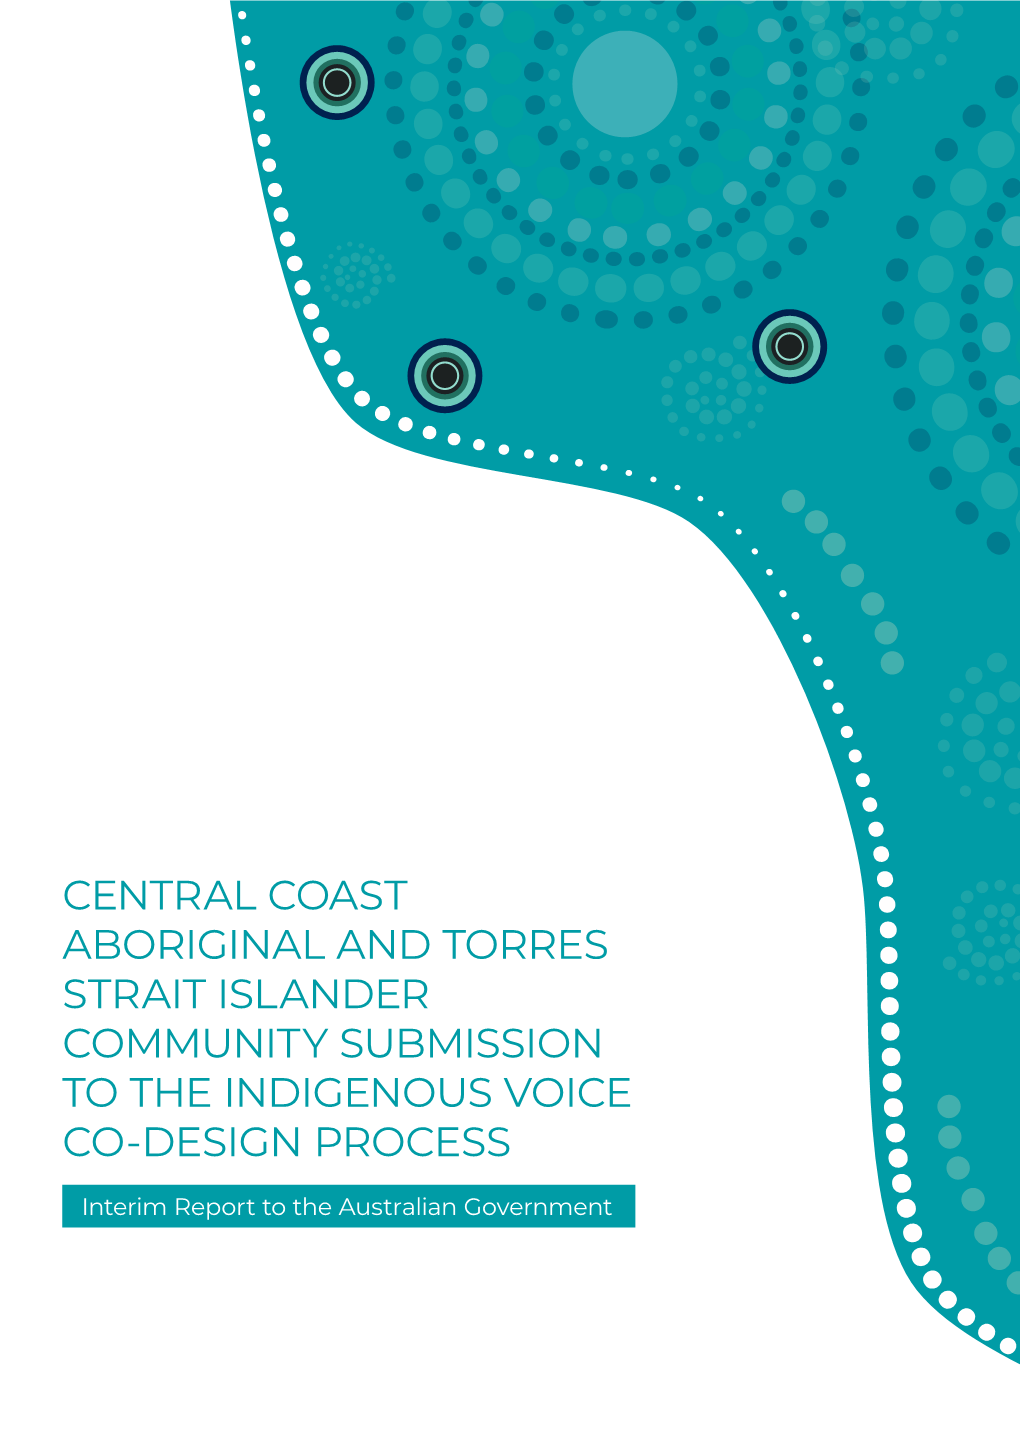 Central Coast Aboriginal and Torres Strait Islander Community Submission to the Indigenous Voice Co-Design Process